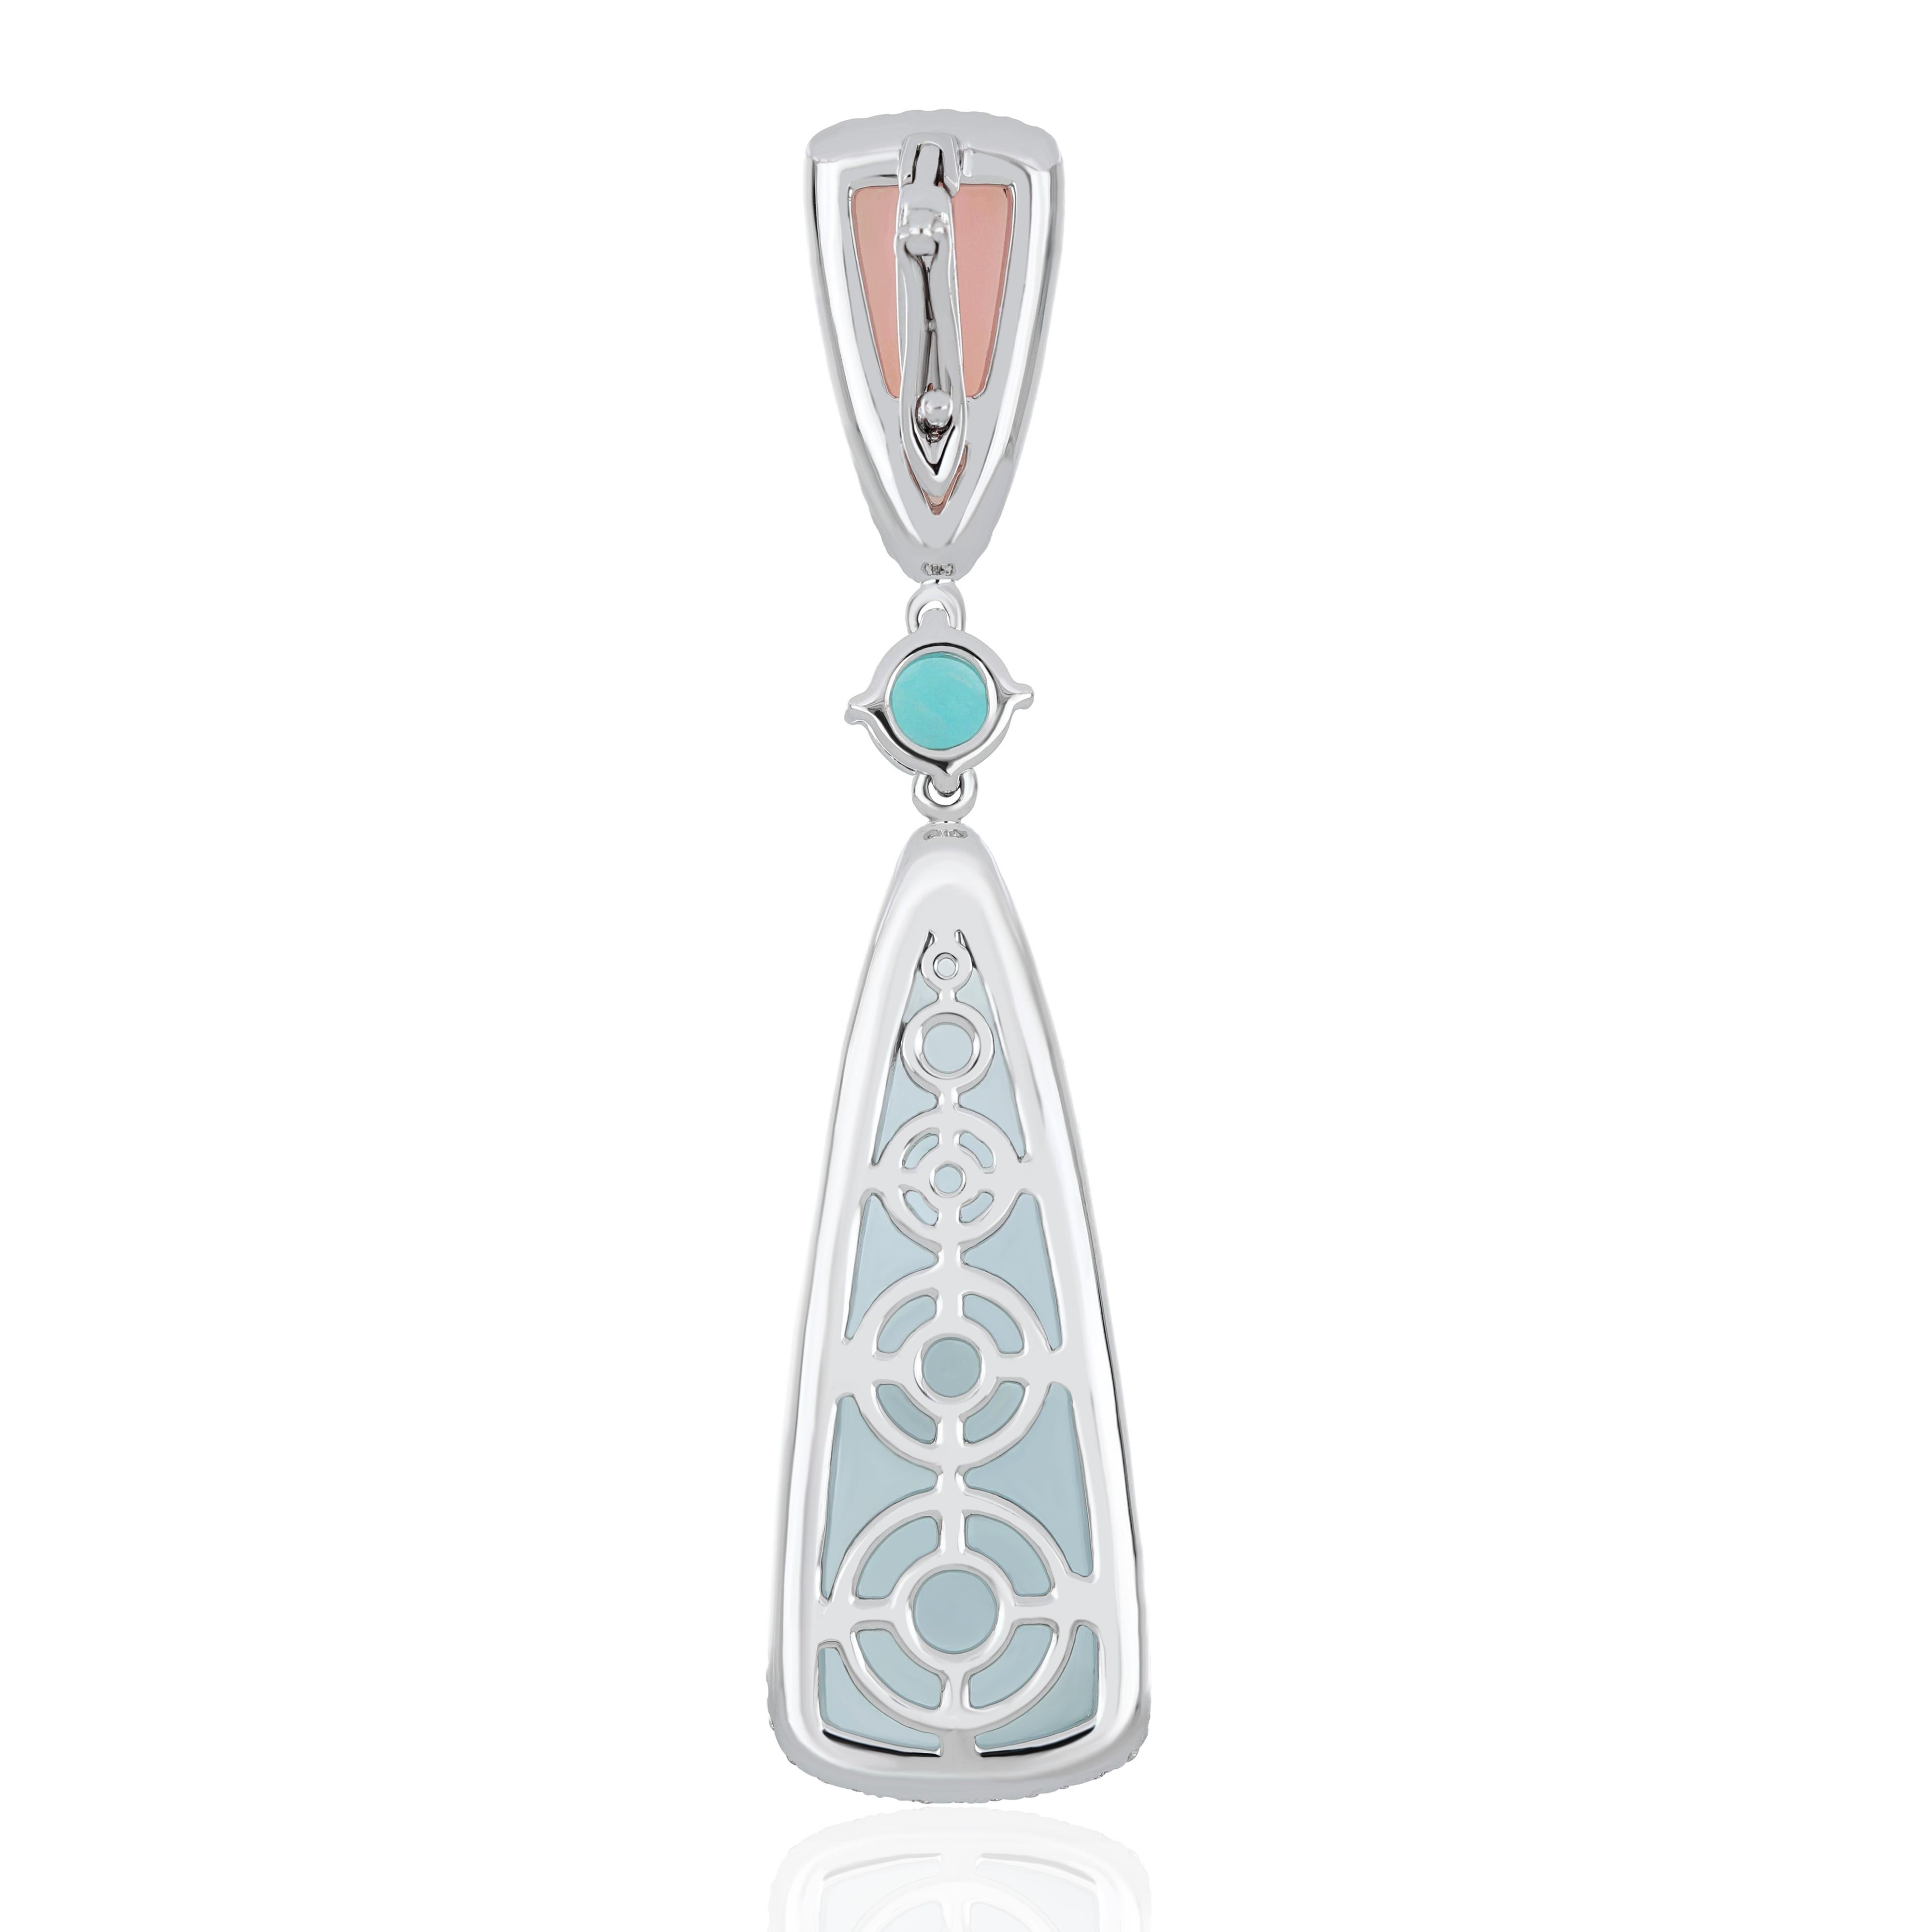 Elegant and exquisitely detailed 14 Karat White Gold Pendant, adorned with Cabochon 9.85 CT Trillion Shape Milky Aquamarine & 1.74 CT Pink Opal enhanced with Round Amazonite  and Diamonds, weighing approx. 0.43 CT  Beautifully Hand crafted in 14